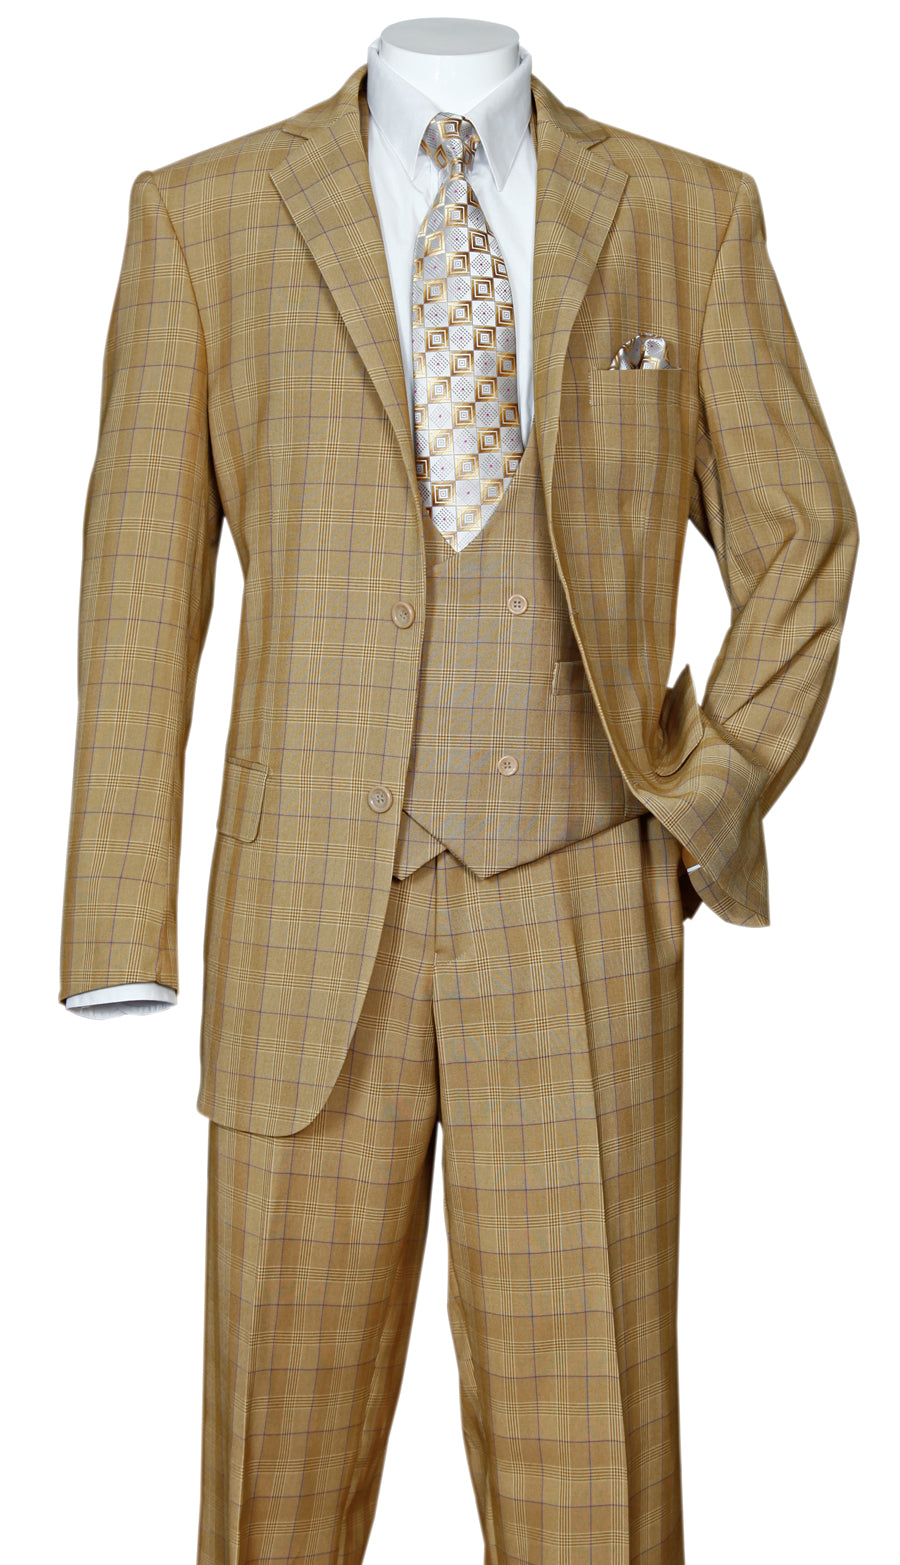 Fortino Landi Suit 5702V6C-Tan - Church Suits For Less